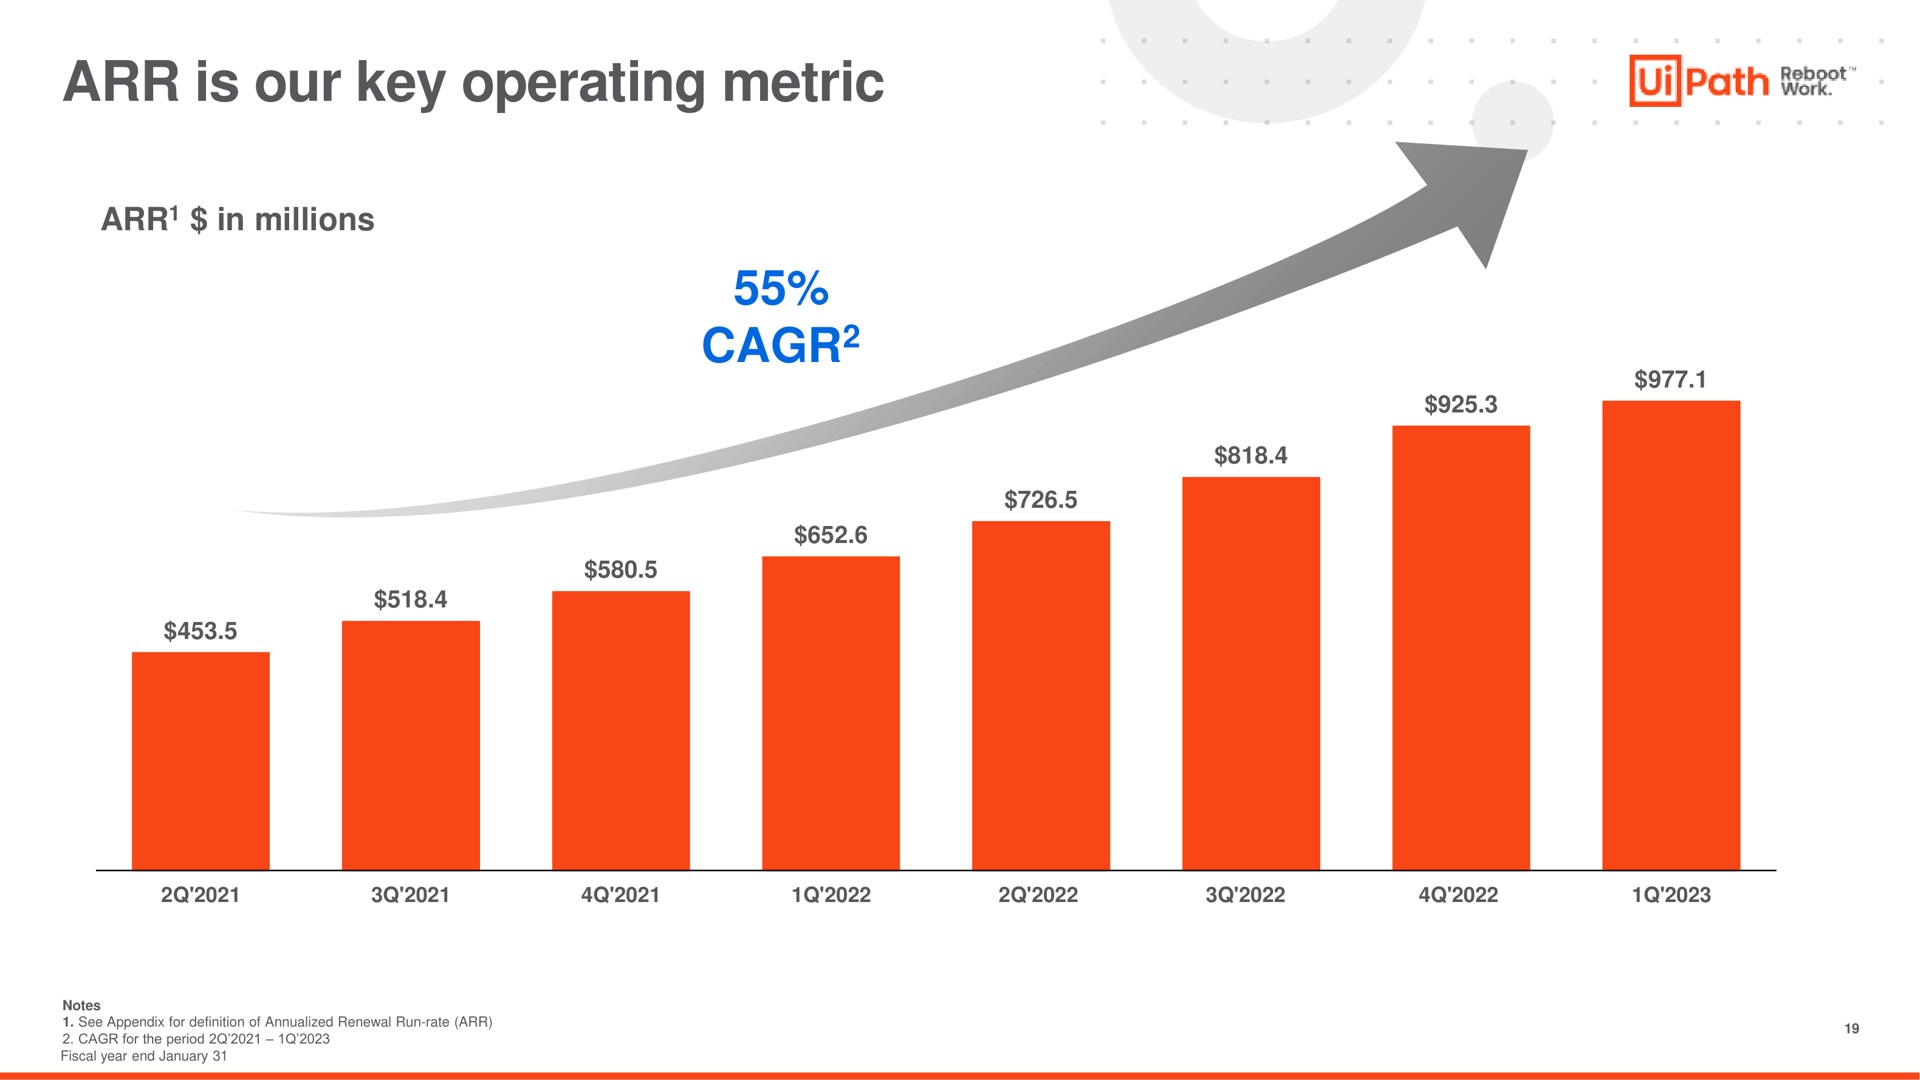 is our key operating metric path | UiPath